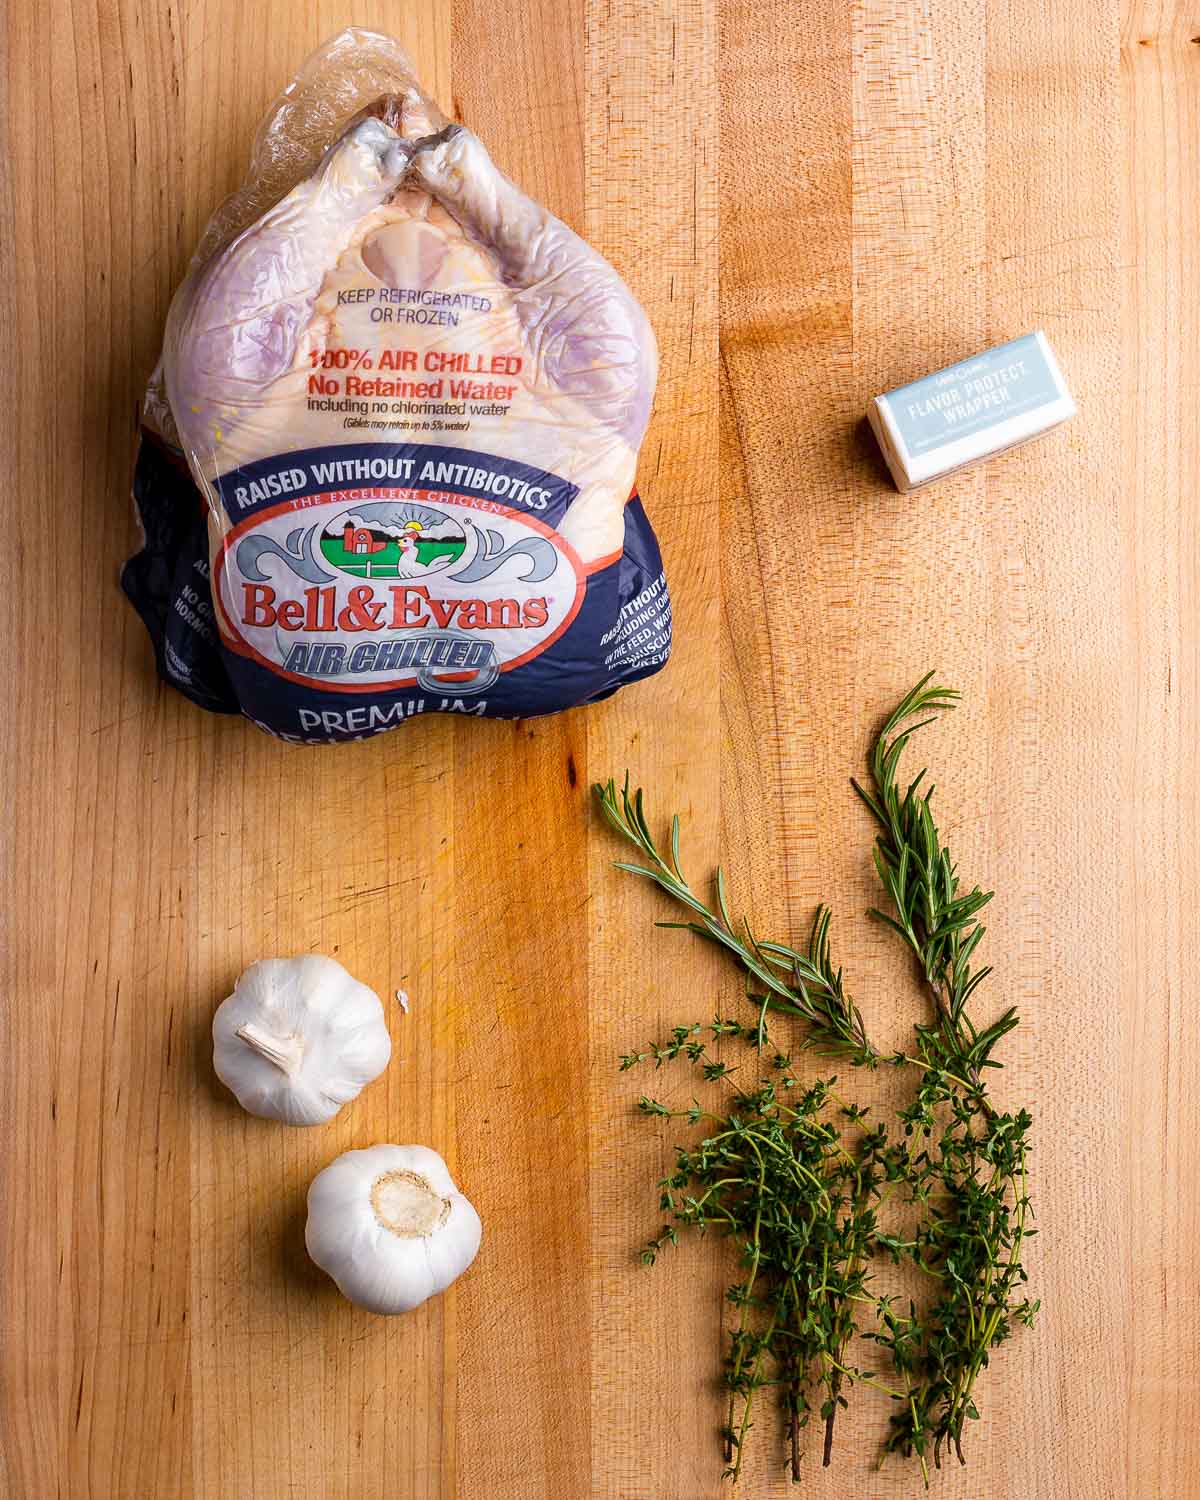 Ingredients shown: Whole chicken, butter, garlic, fresh rosemary and thyme.